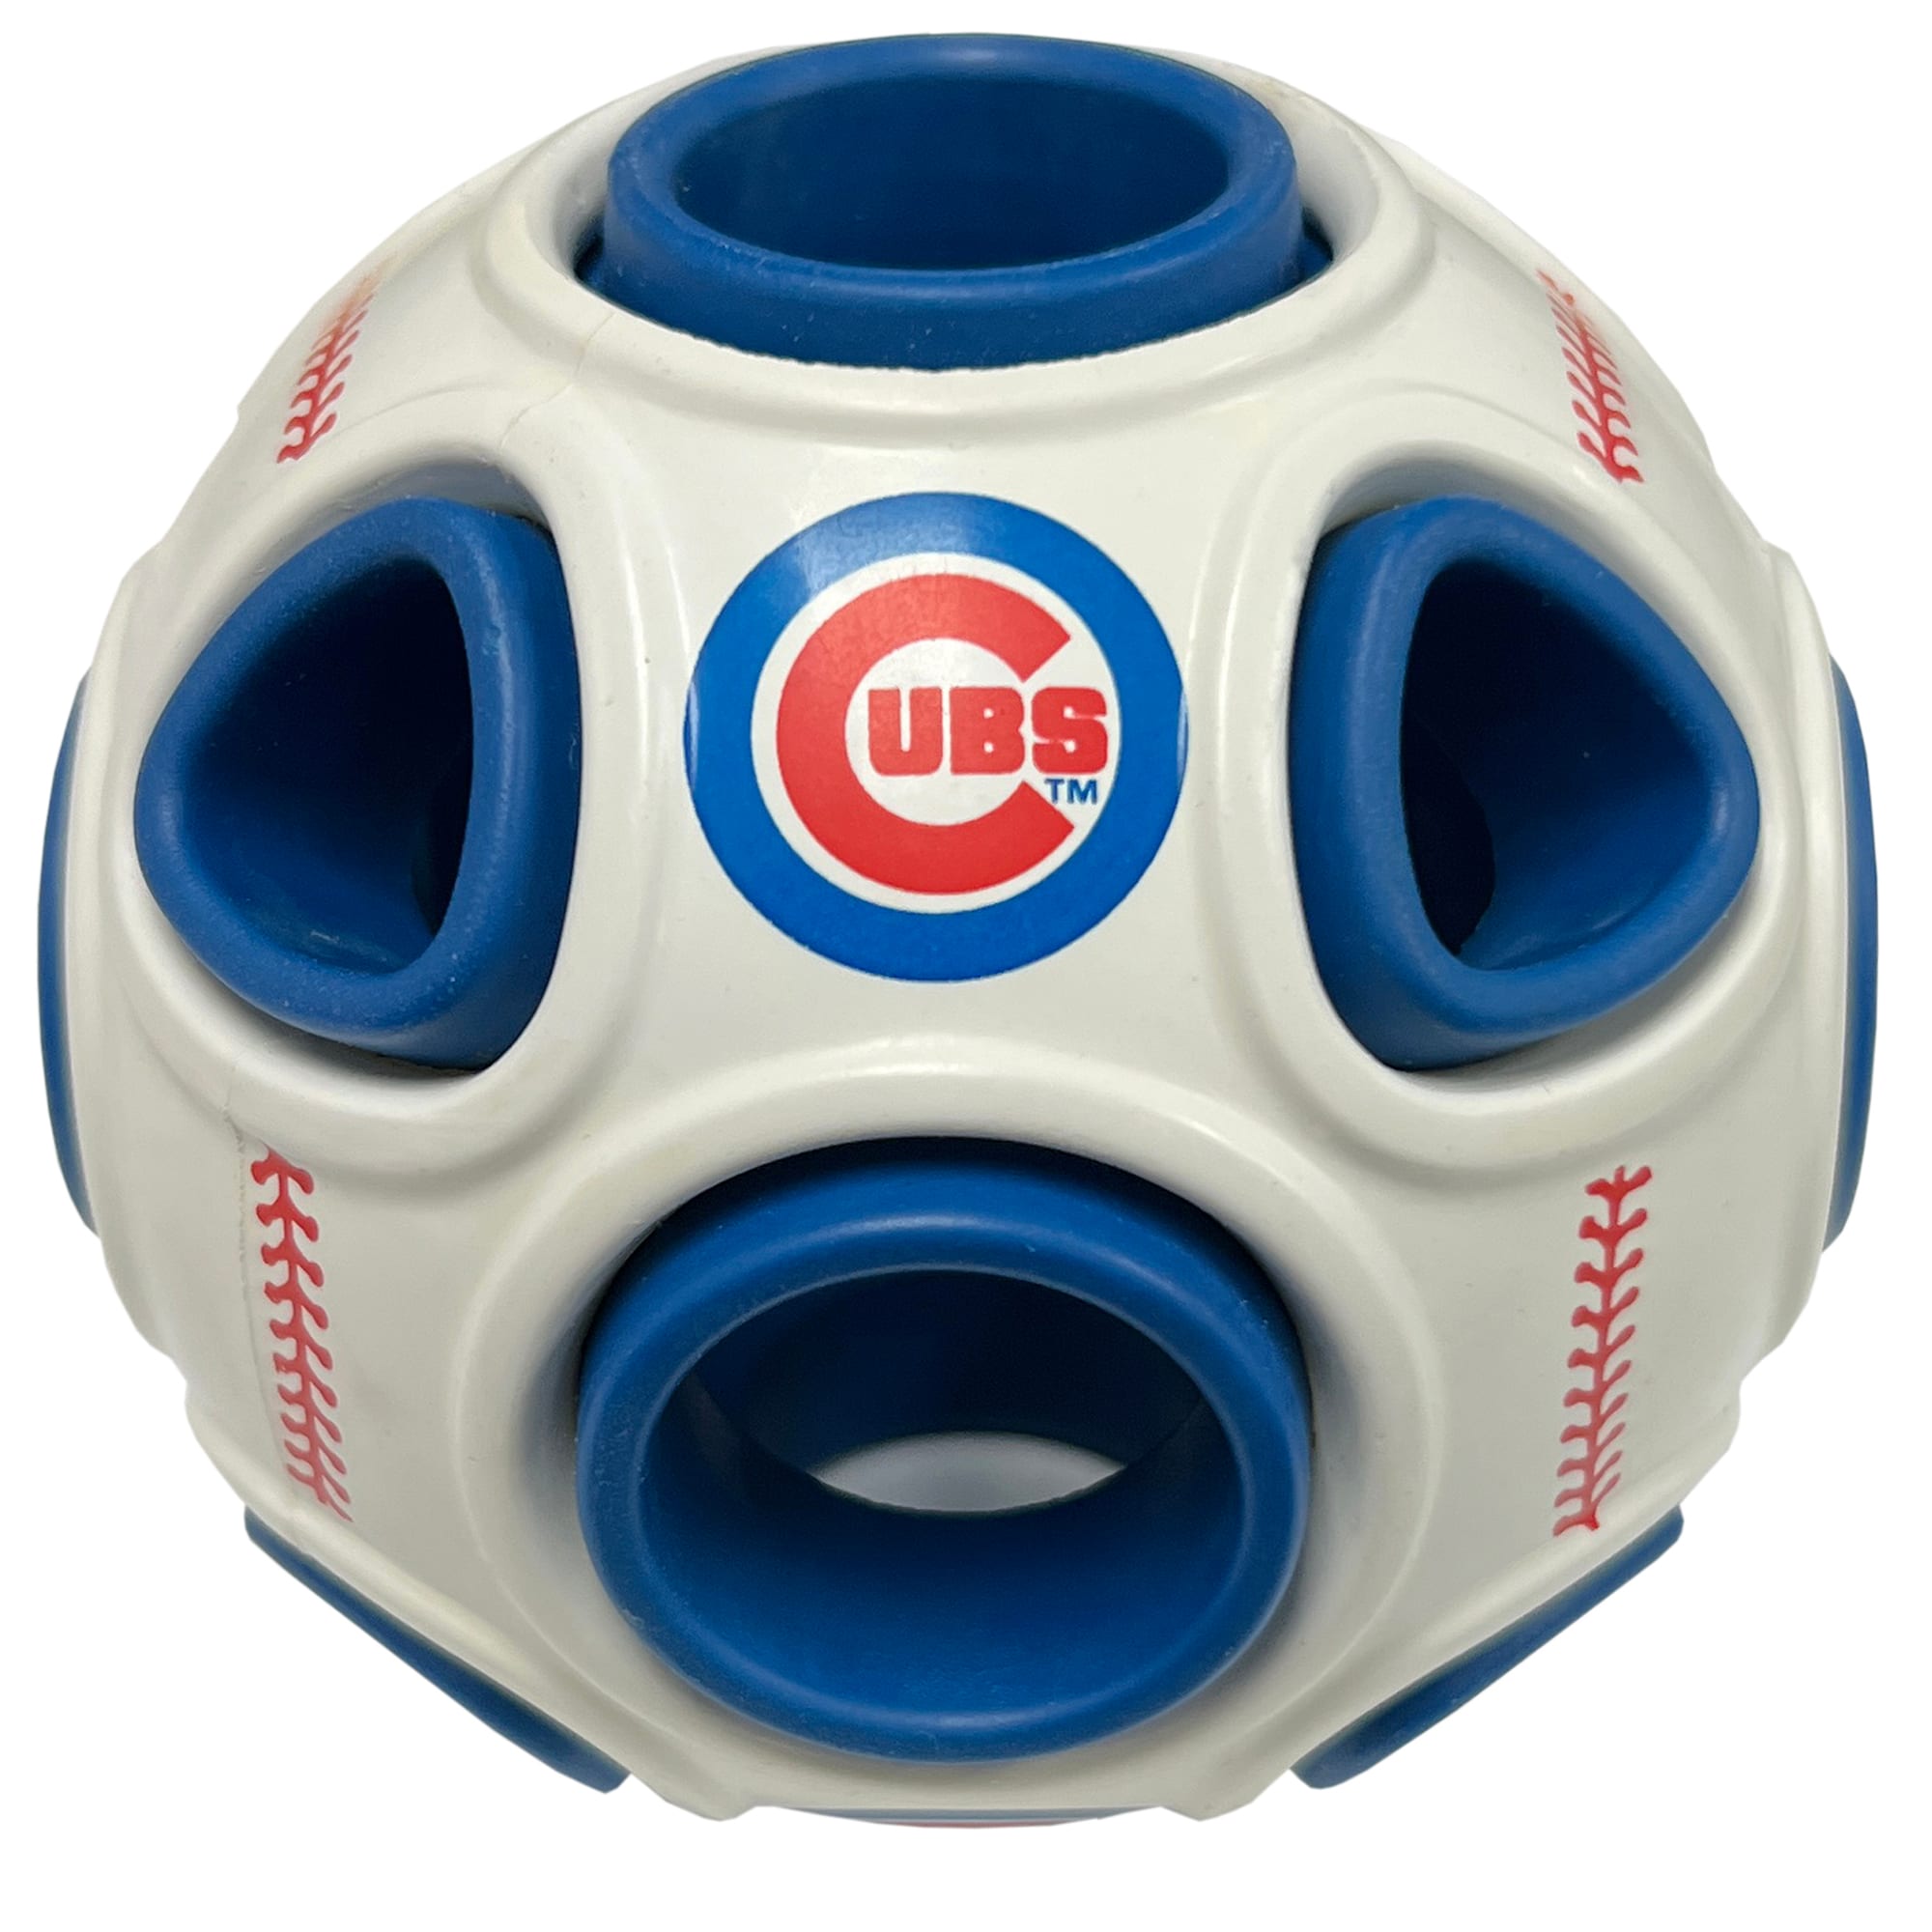 Official Chicago Cubs Pet Gear, Cubs Collars, Leashes, Chew Toys